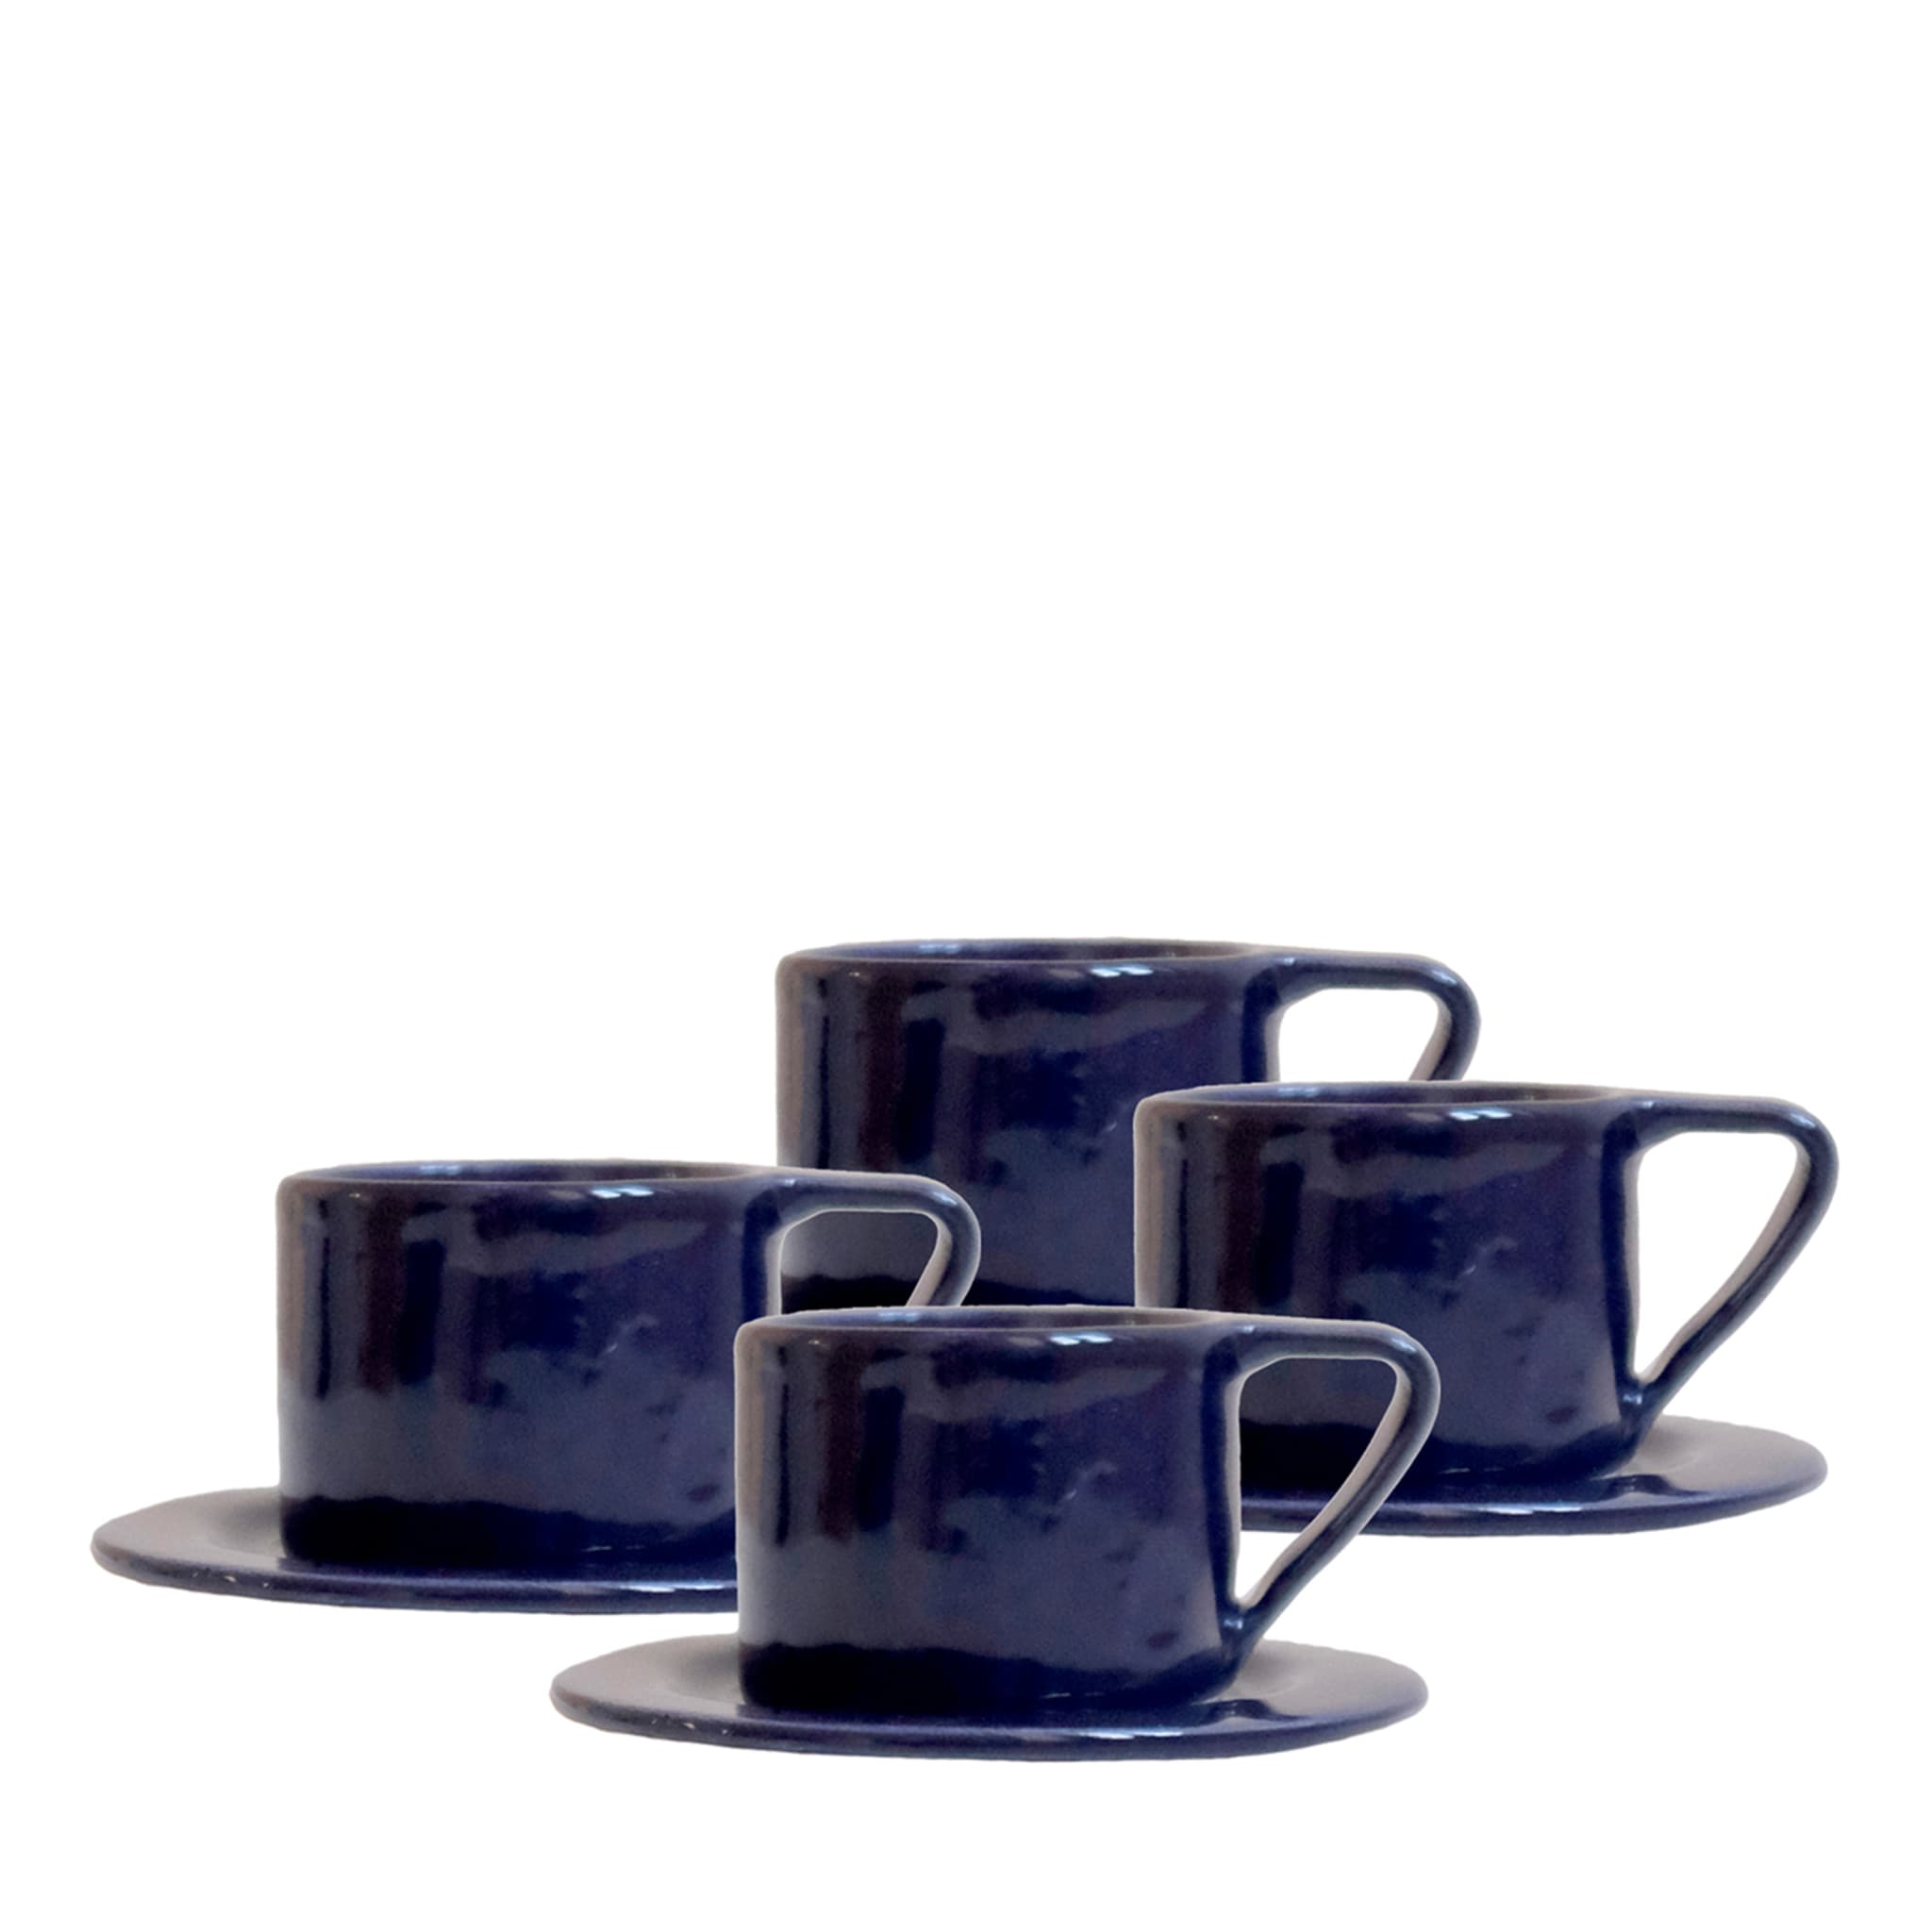 Milano Notte Set of 4 Espresso cups and saucers - Main view